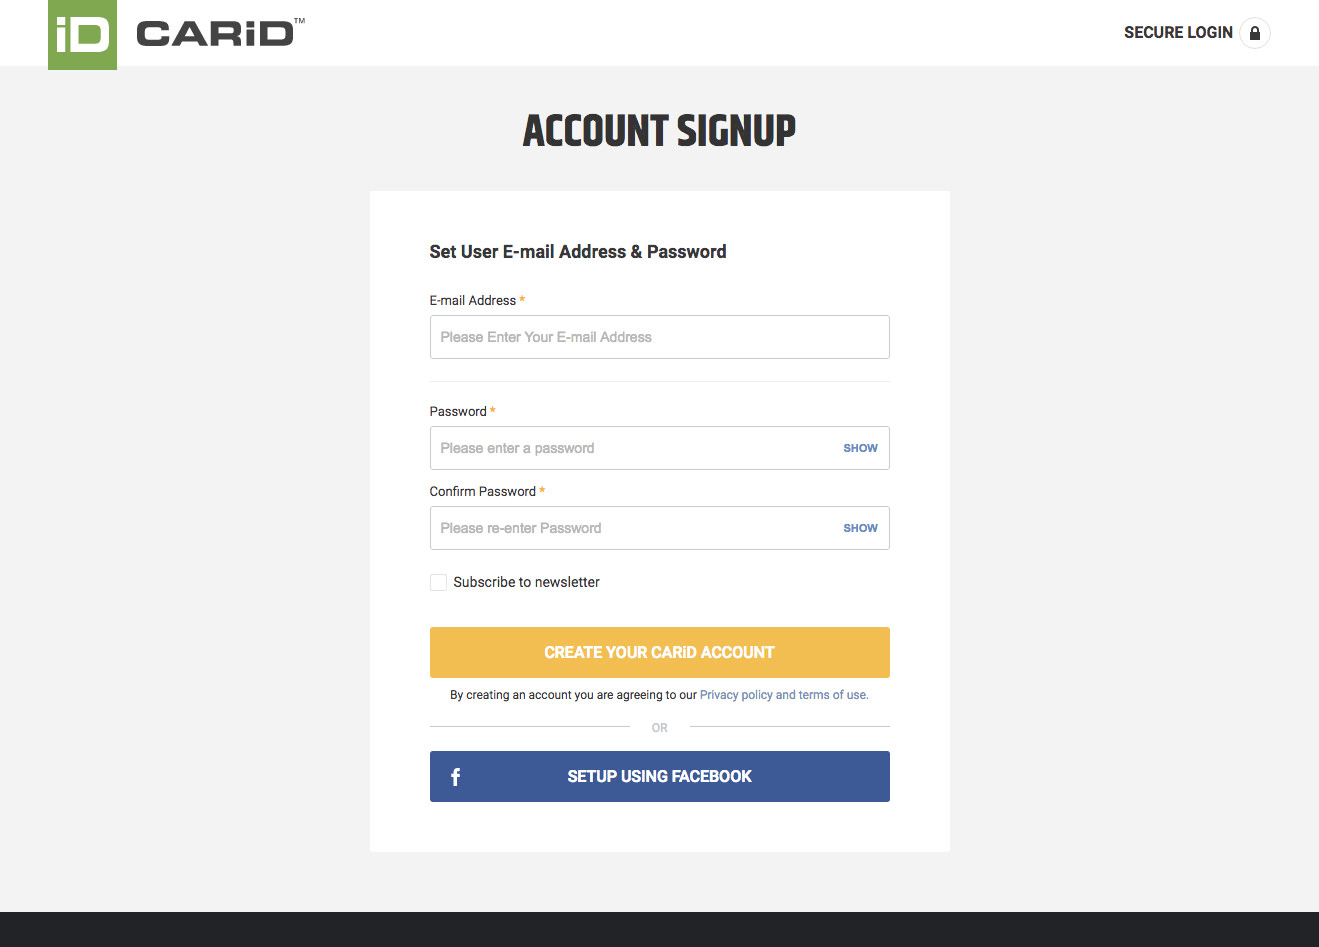 CarID's account signup page